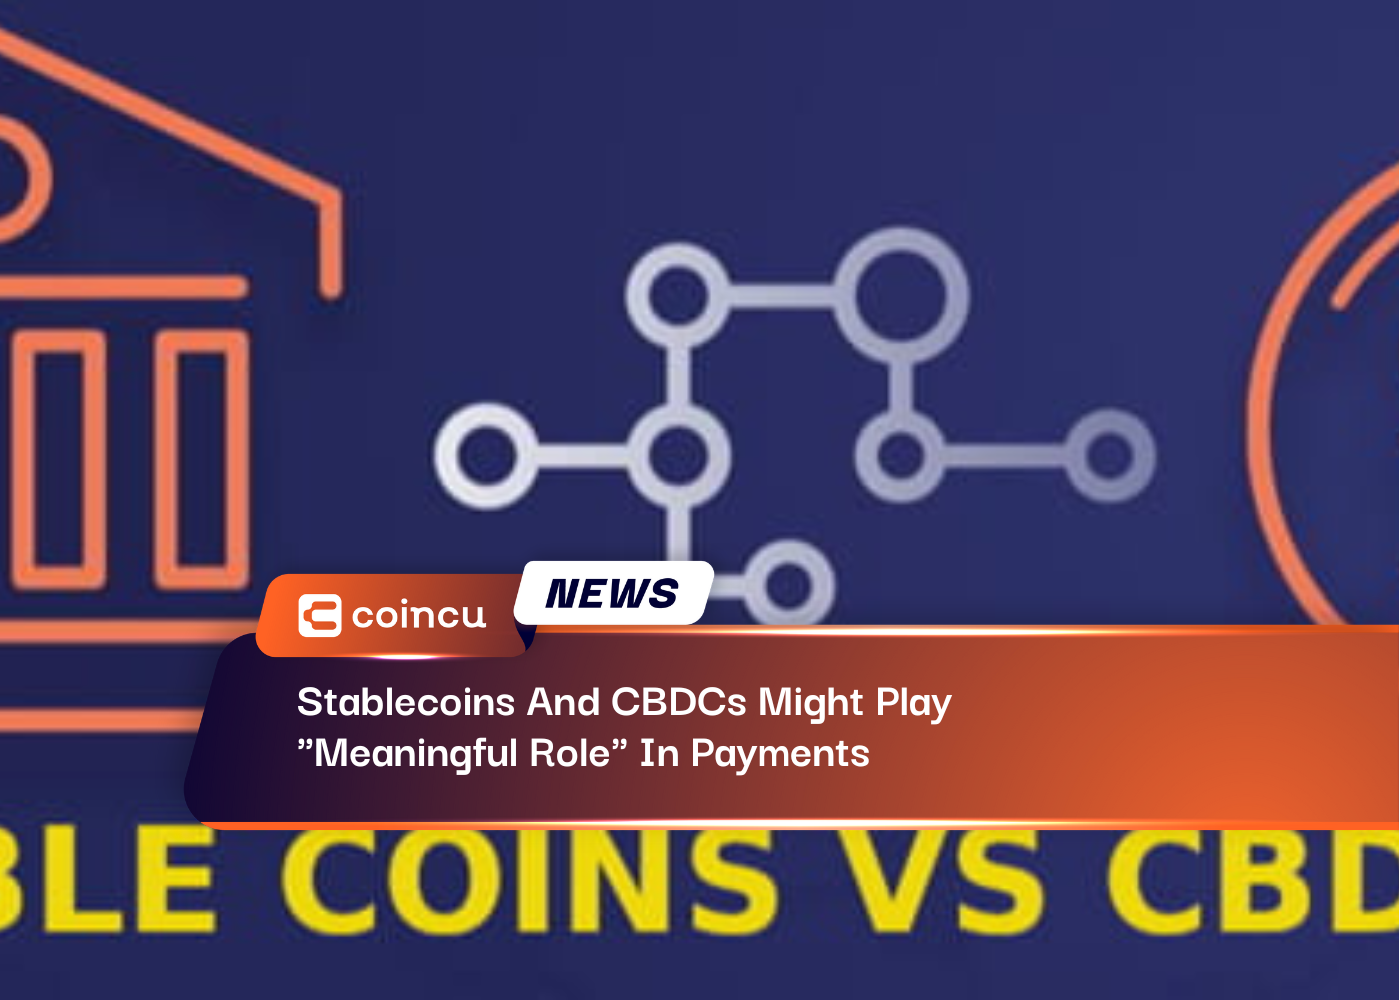 Stablecoins And CBDCs Might Play